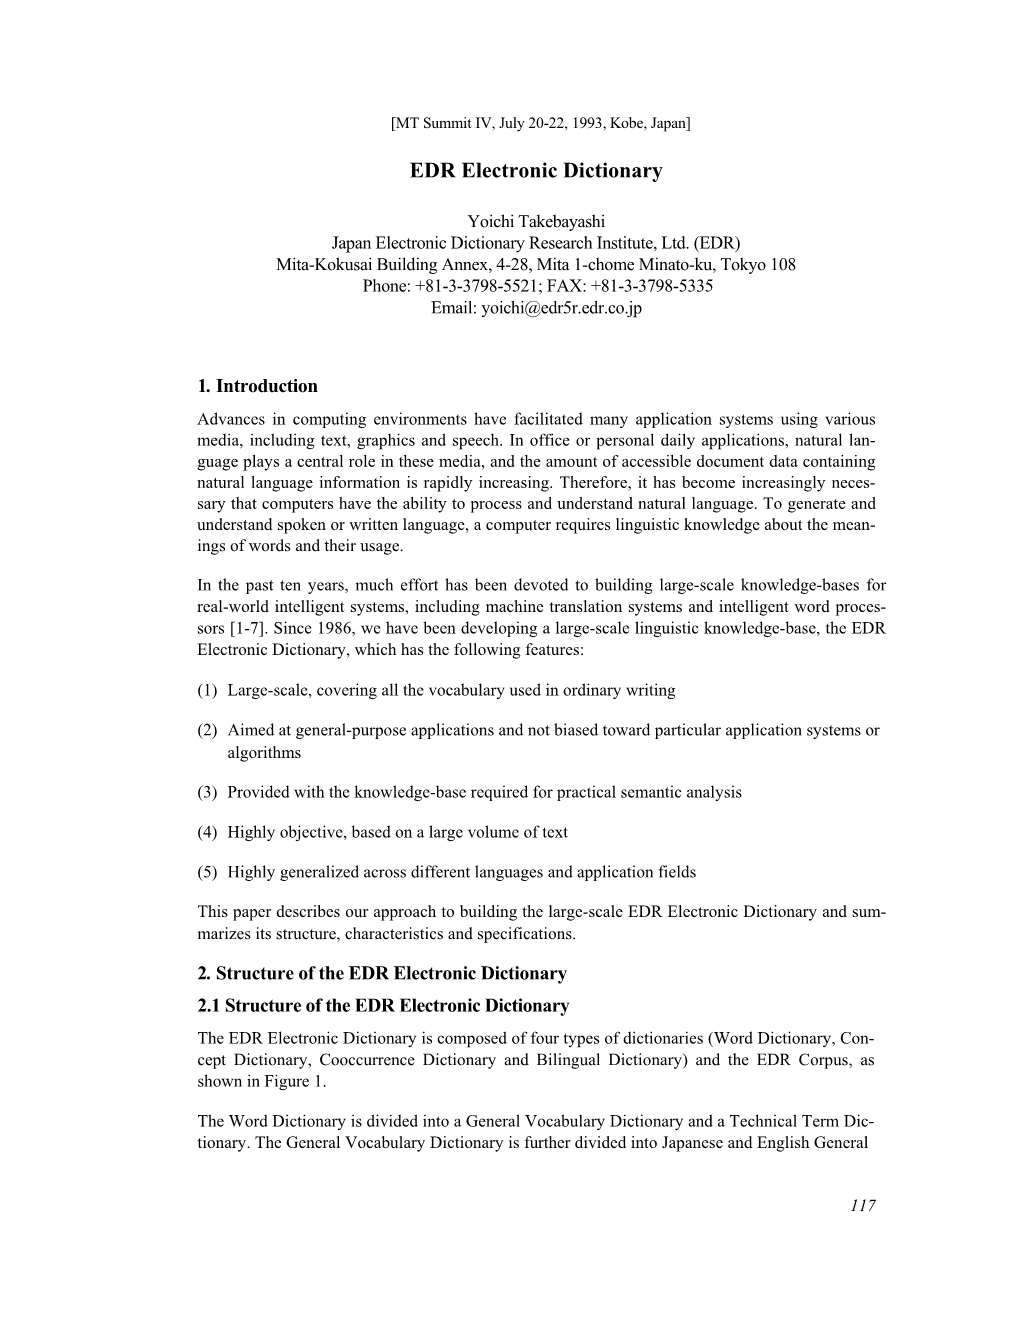 EDR Electronic Dictionary